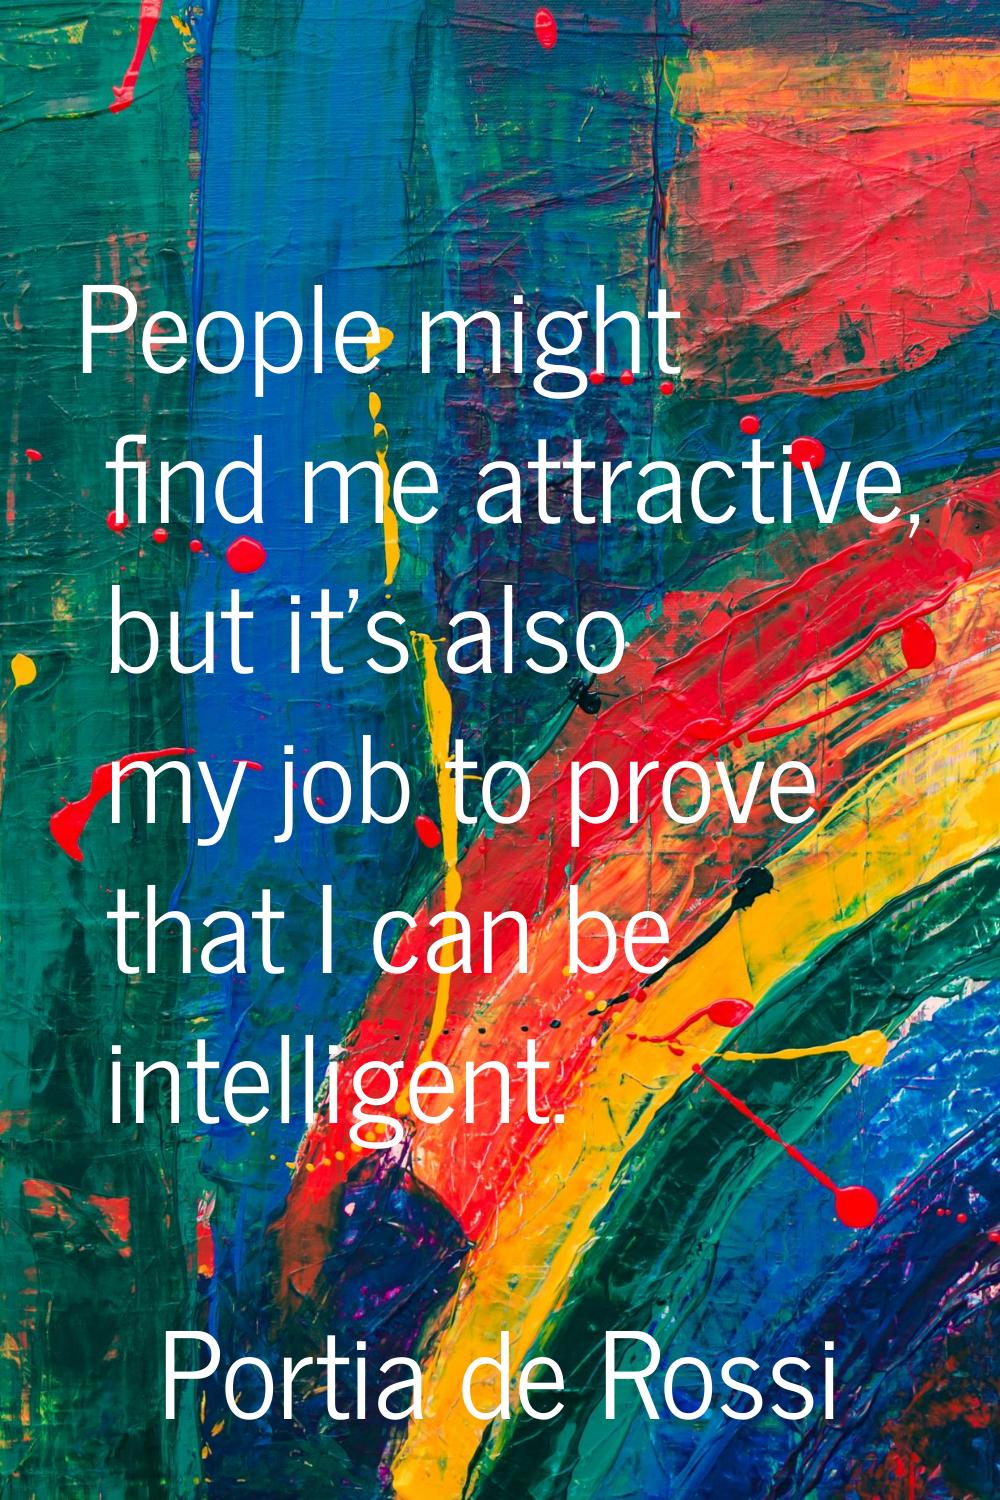 People might find me attractive, but it's also my job to prove that I can be intelligent.